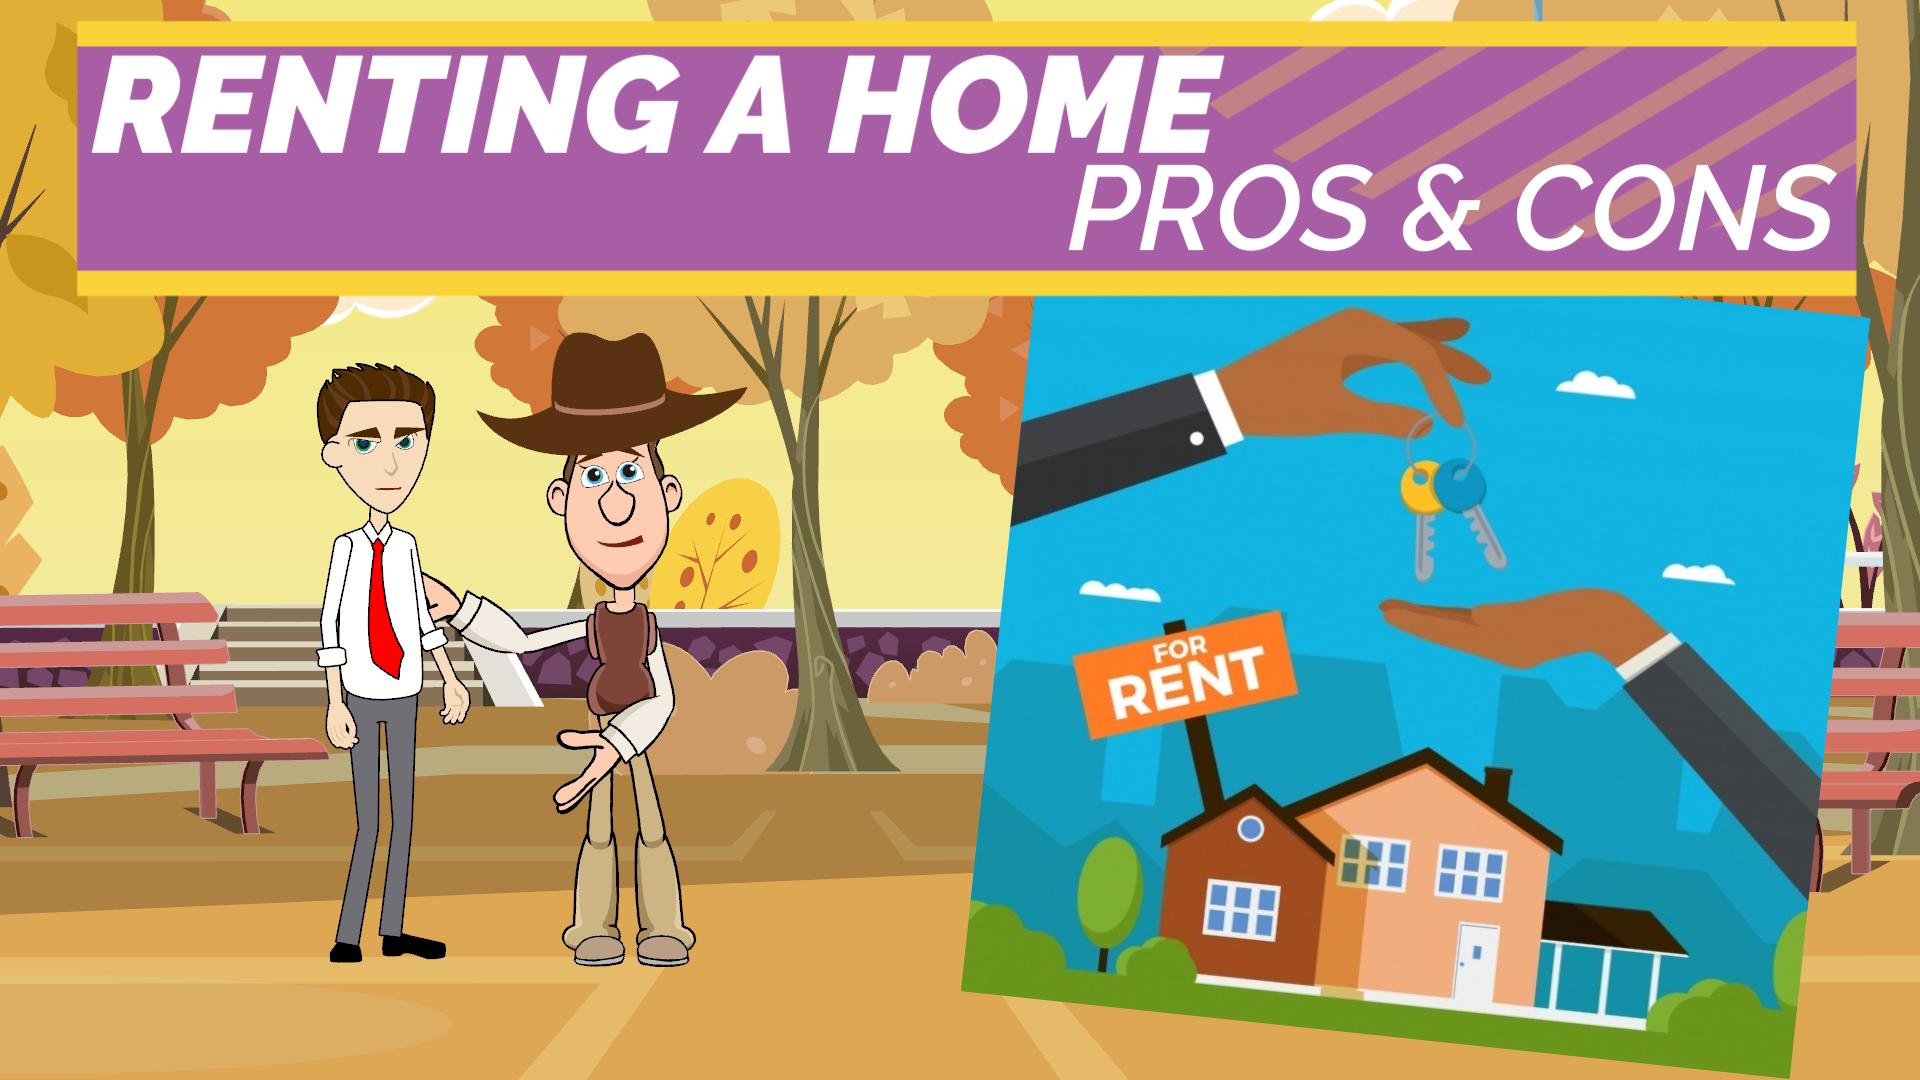 Renting a Home - Pros and Cons